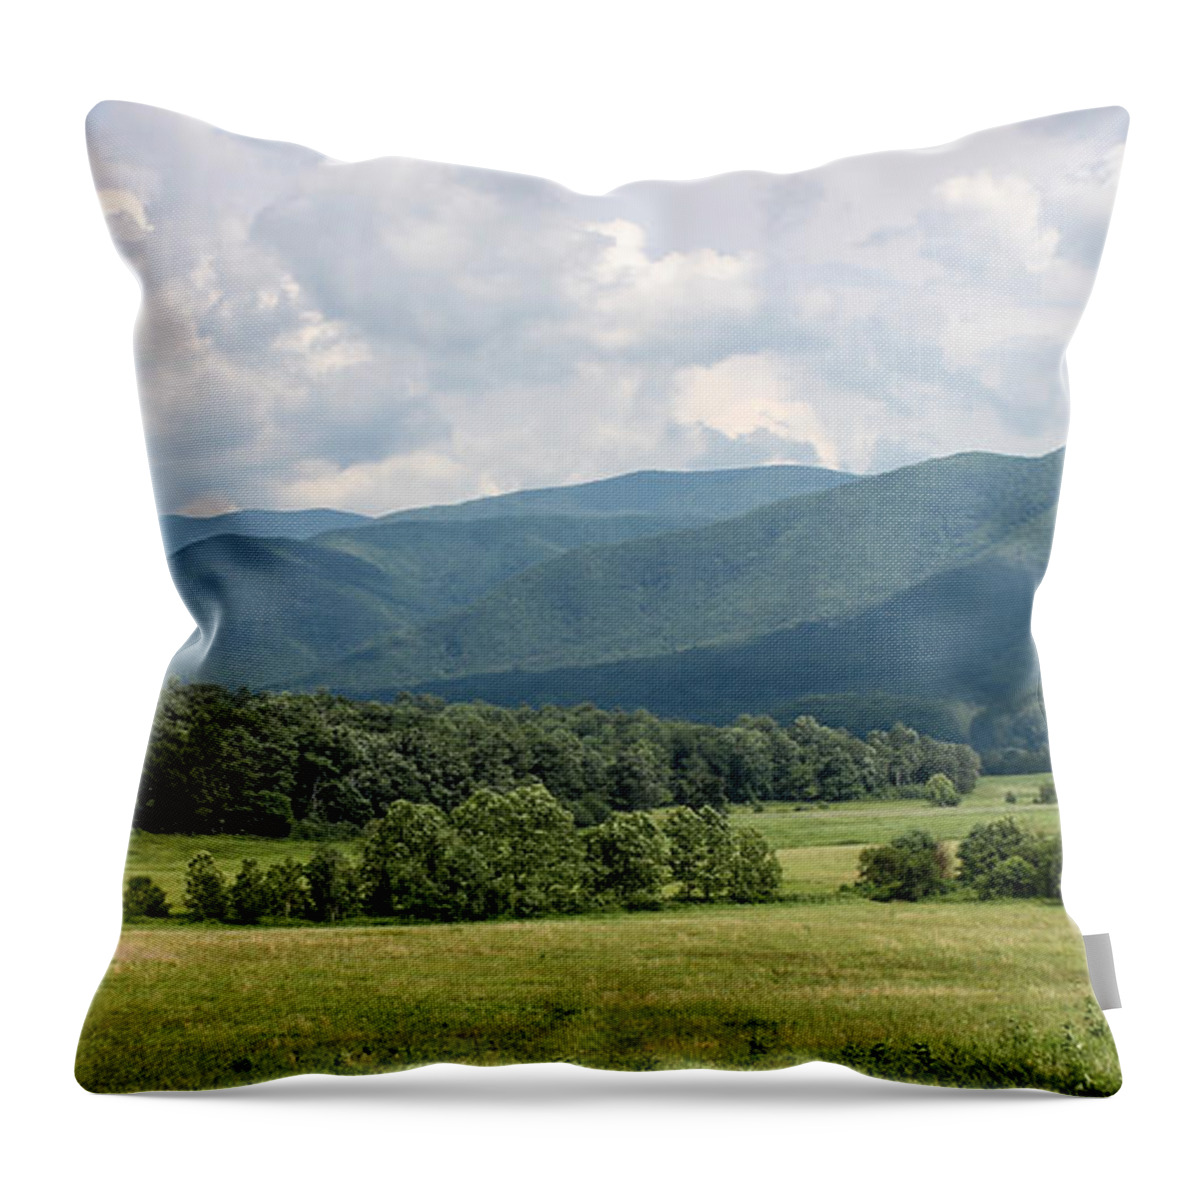 Landscape Throw Pillow featuring the photograph Cades Cove In Summer by Todd Blanchard